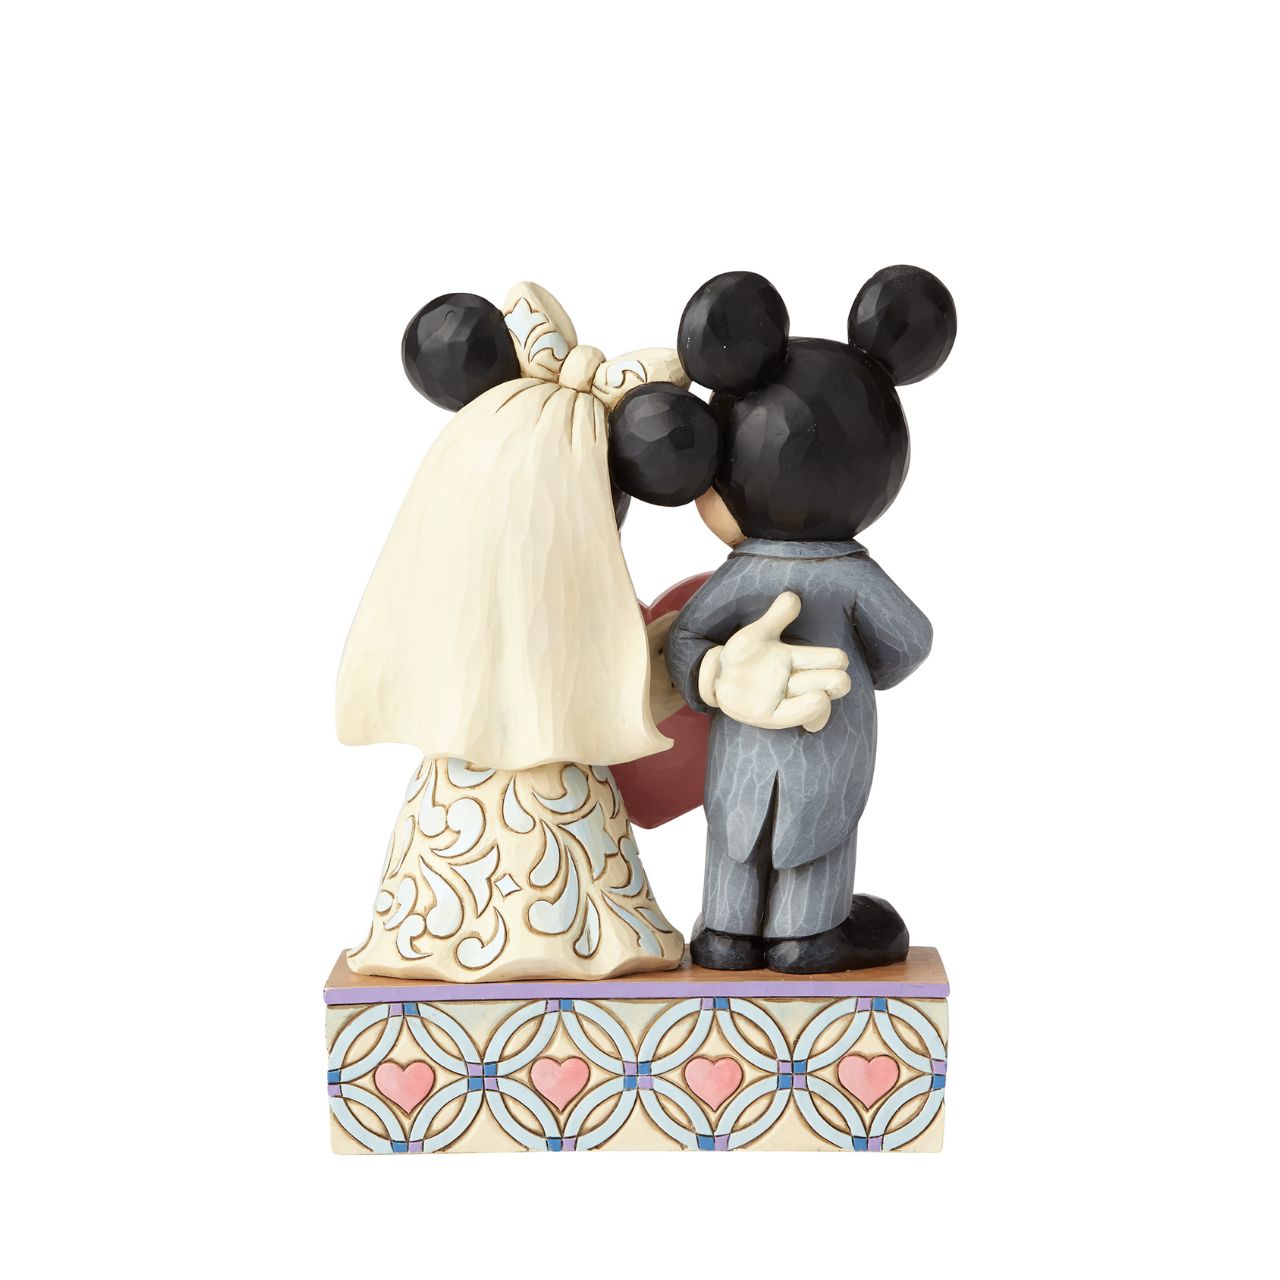 Disney Mickey Mouse and Minnie Mouse Figurine Two Souls, One Heart  This beautifully detailed figurine is a gorgeous depiction of Mickey as a doting groom with quilted accents on his suit and Minnie as a blushing bride in a gown with rosemaling details.